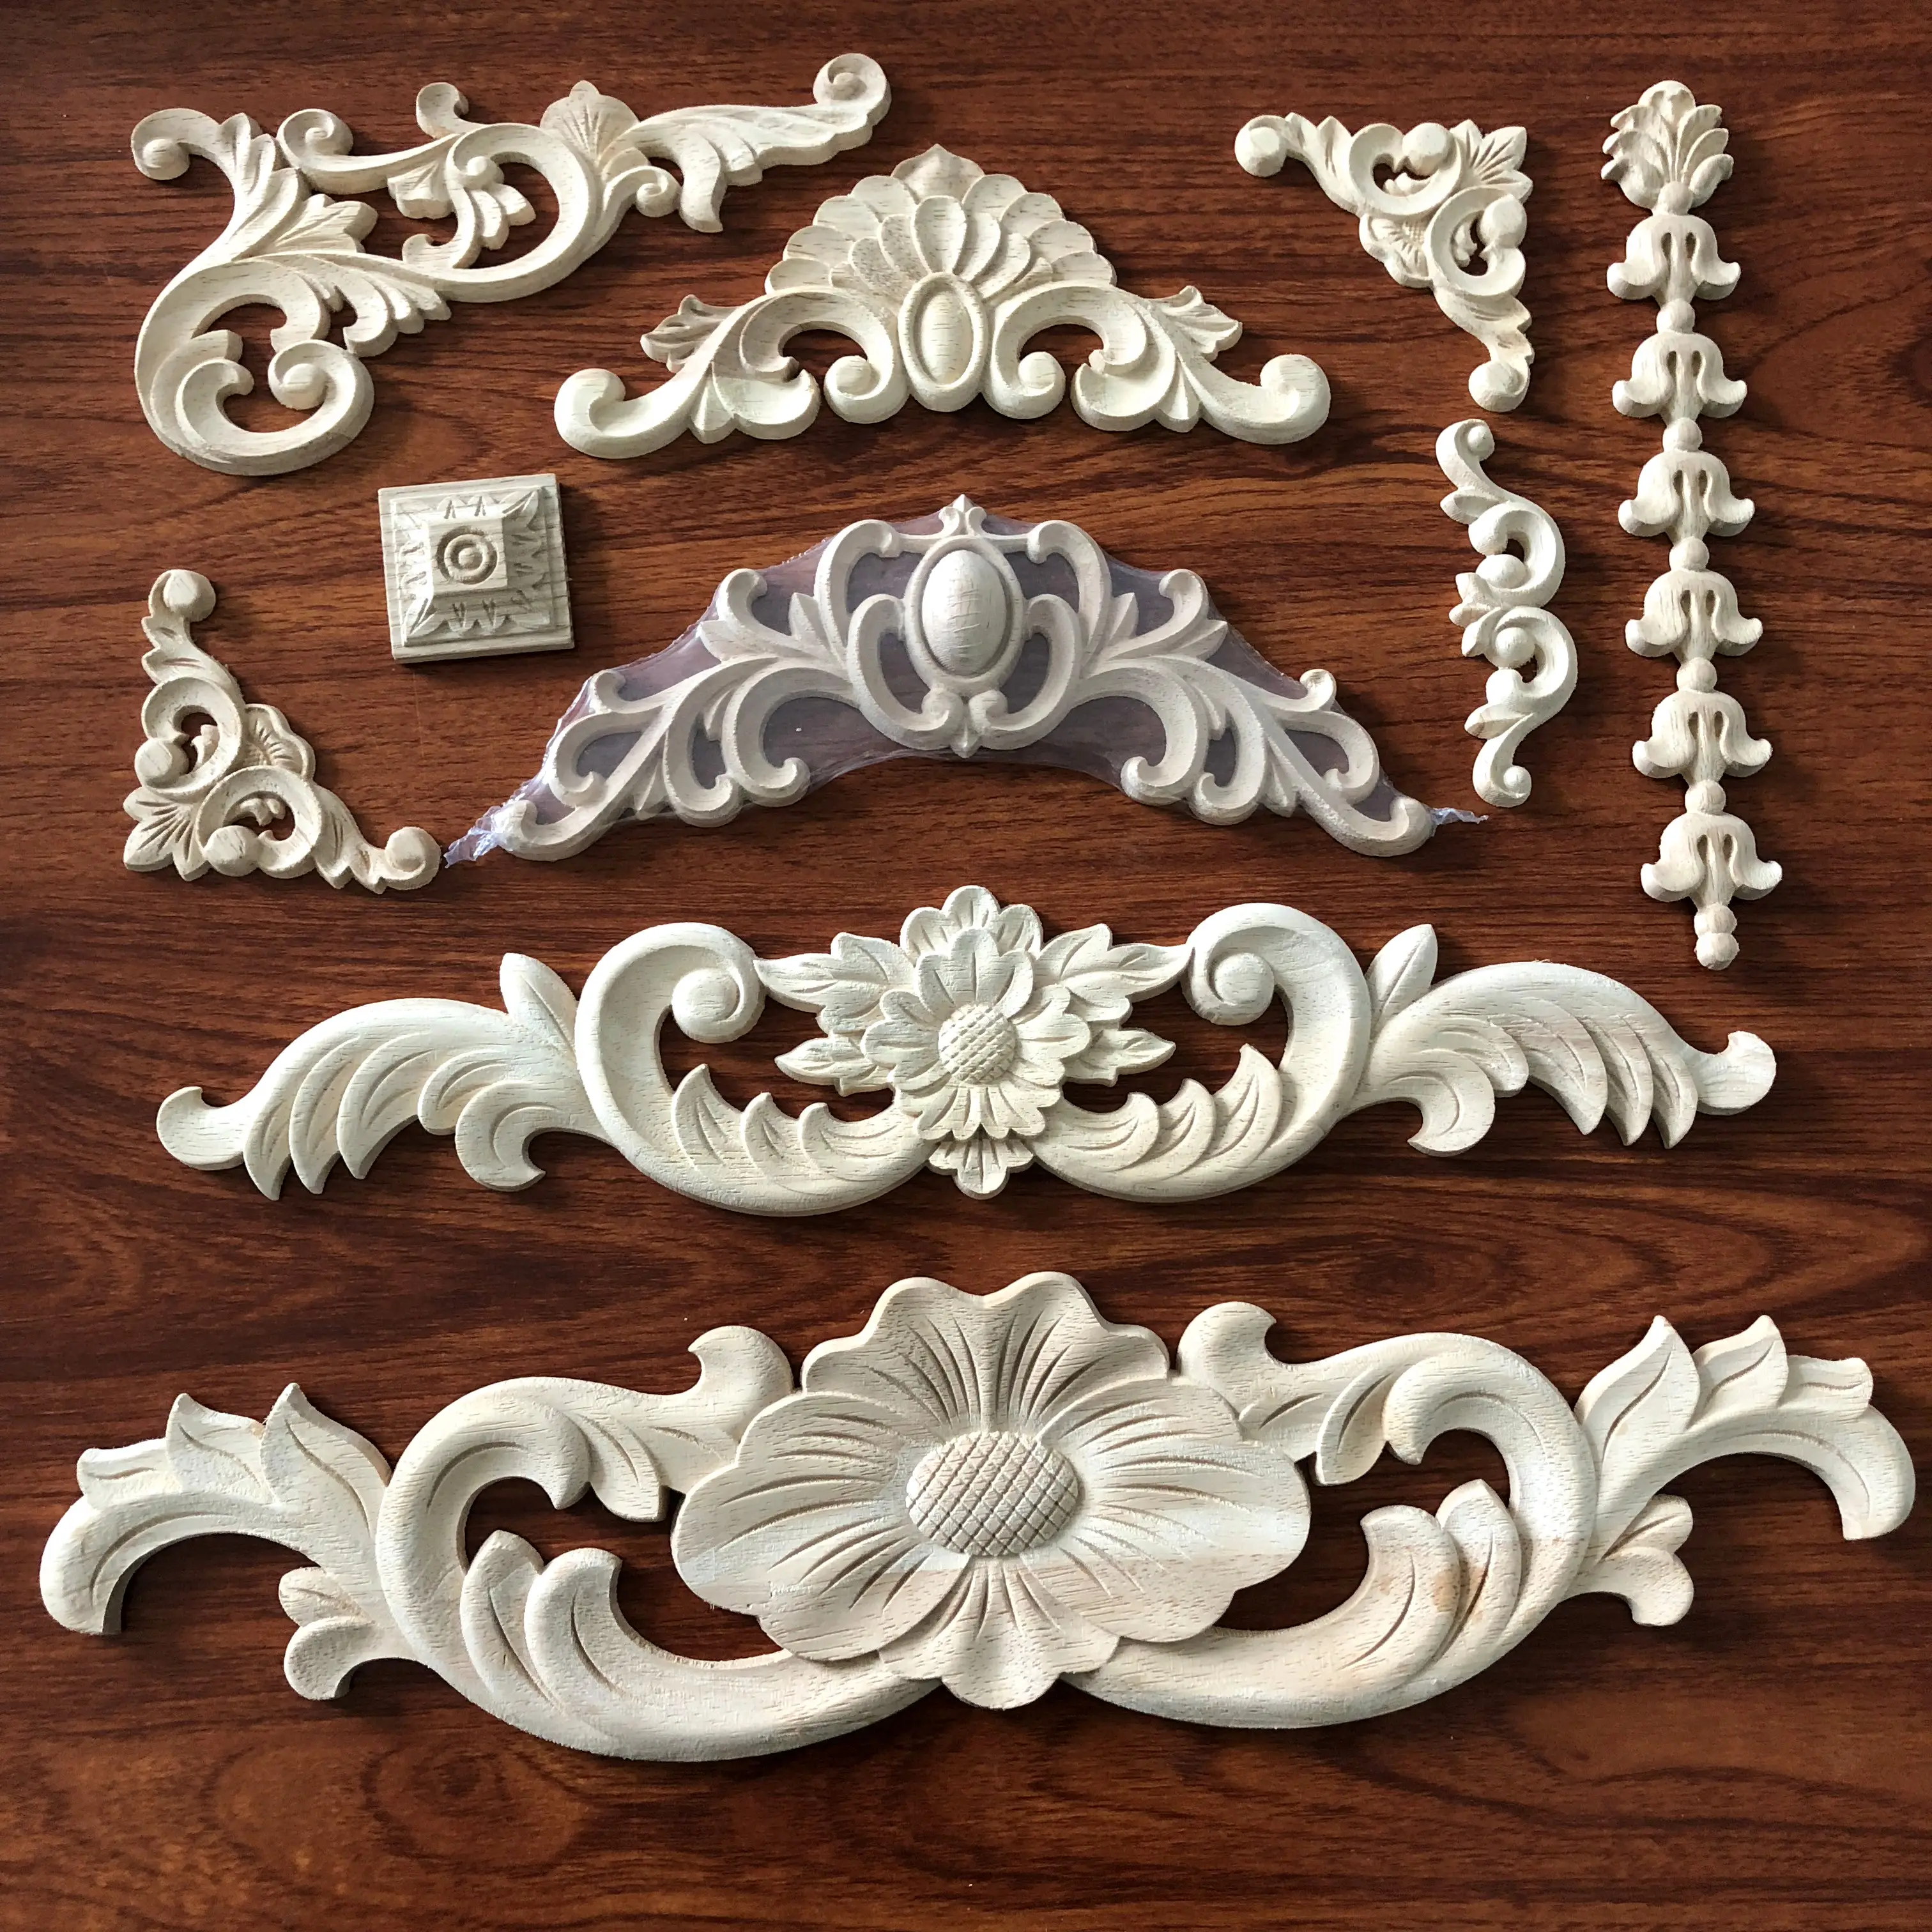 Wooden Carved Appliques Wall Embeshments Onlays Hot Sale Wood Carvings